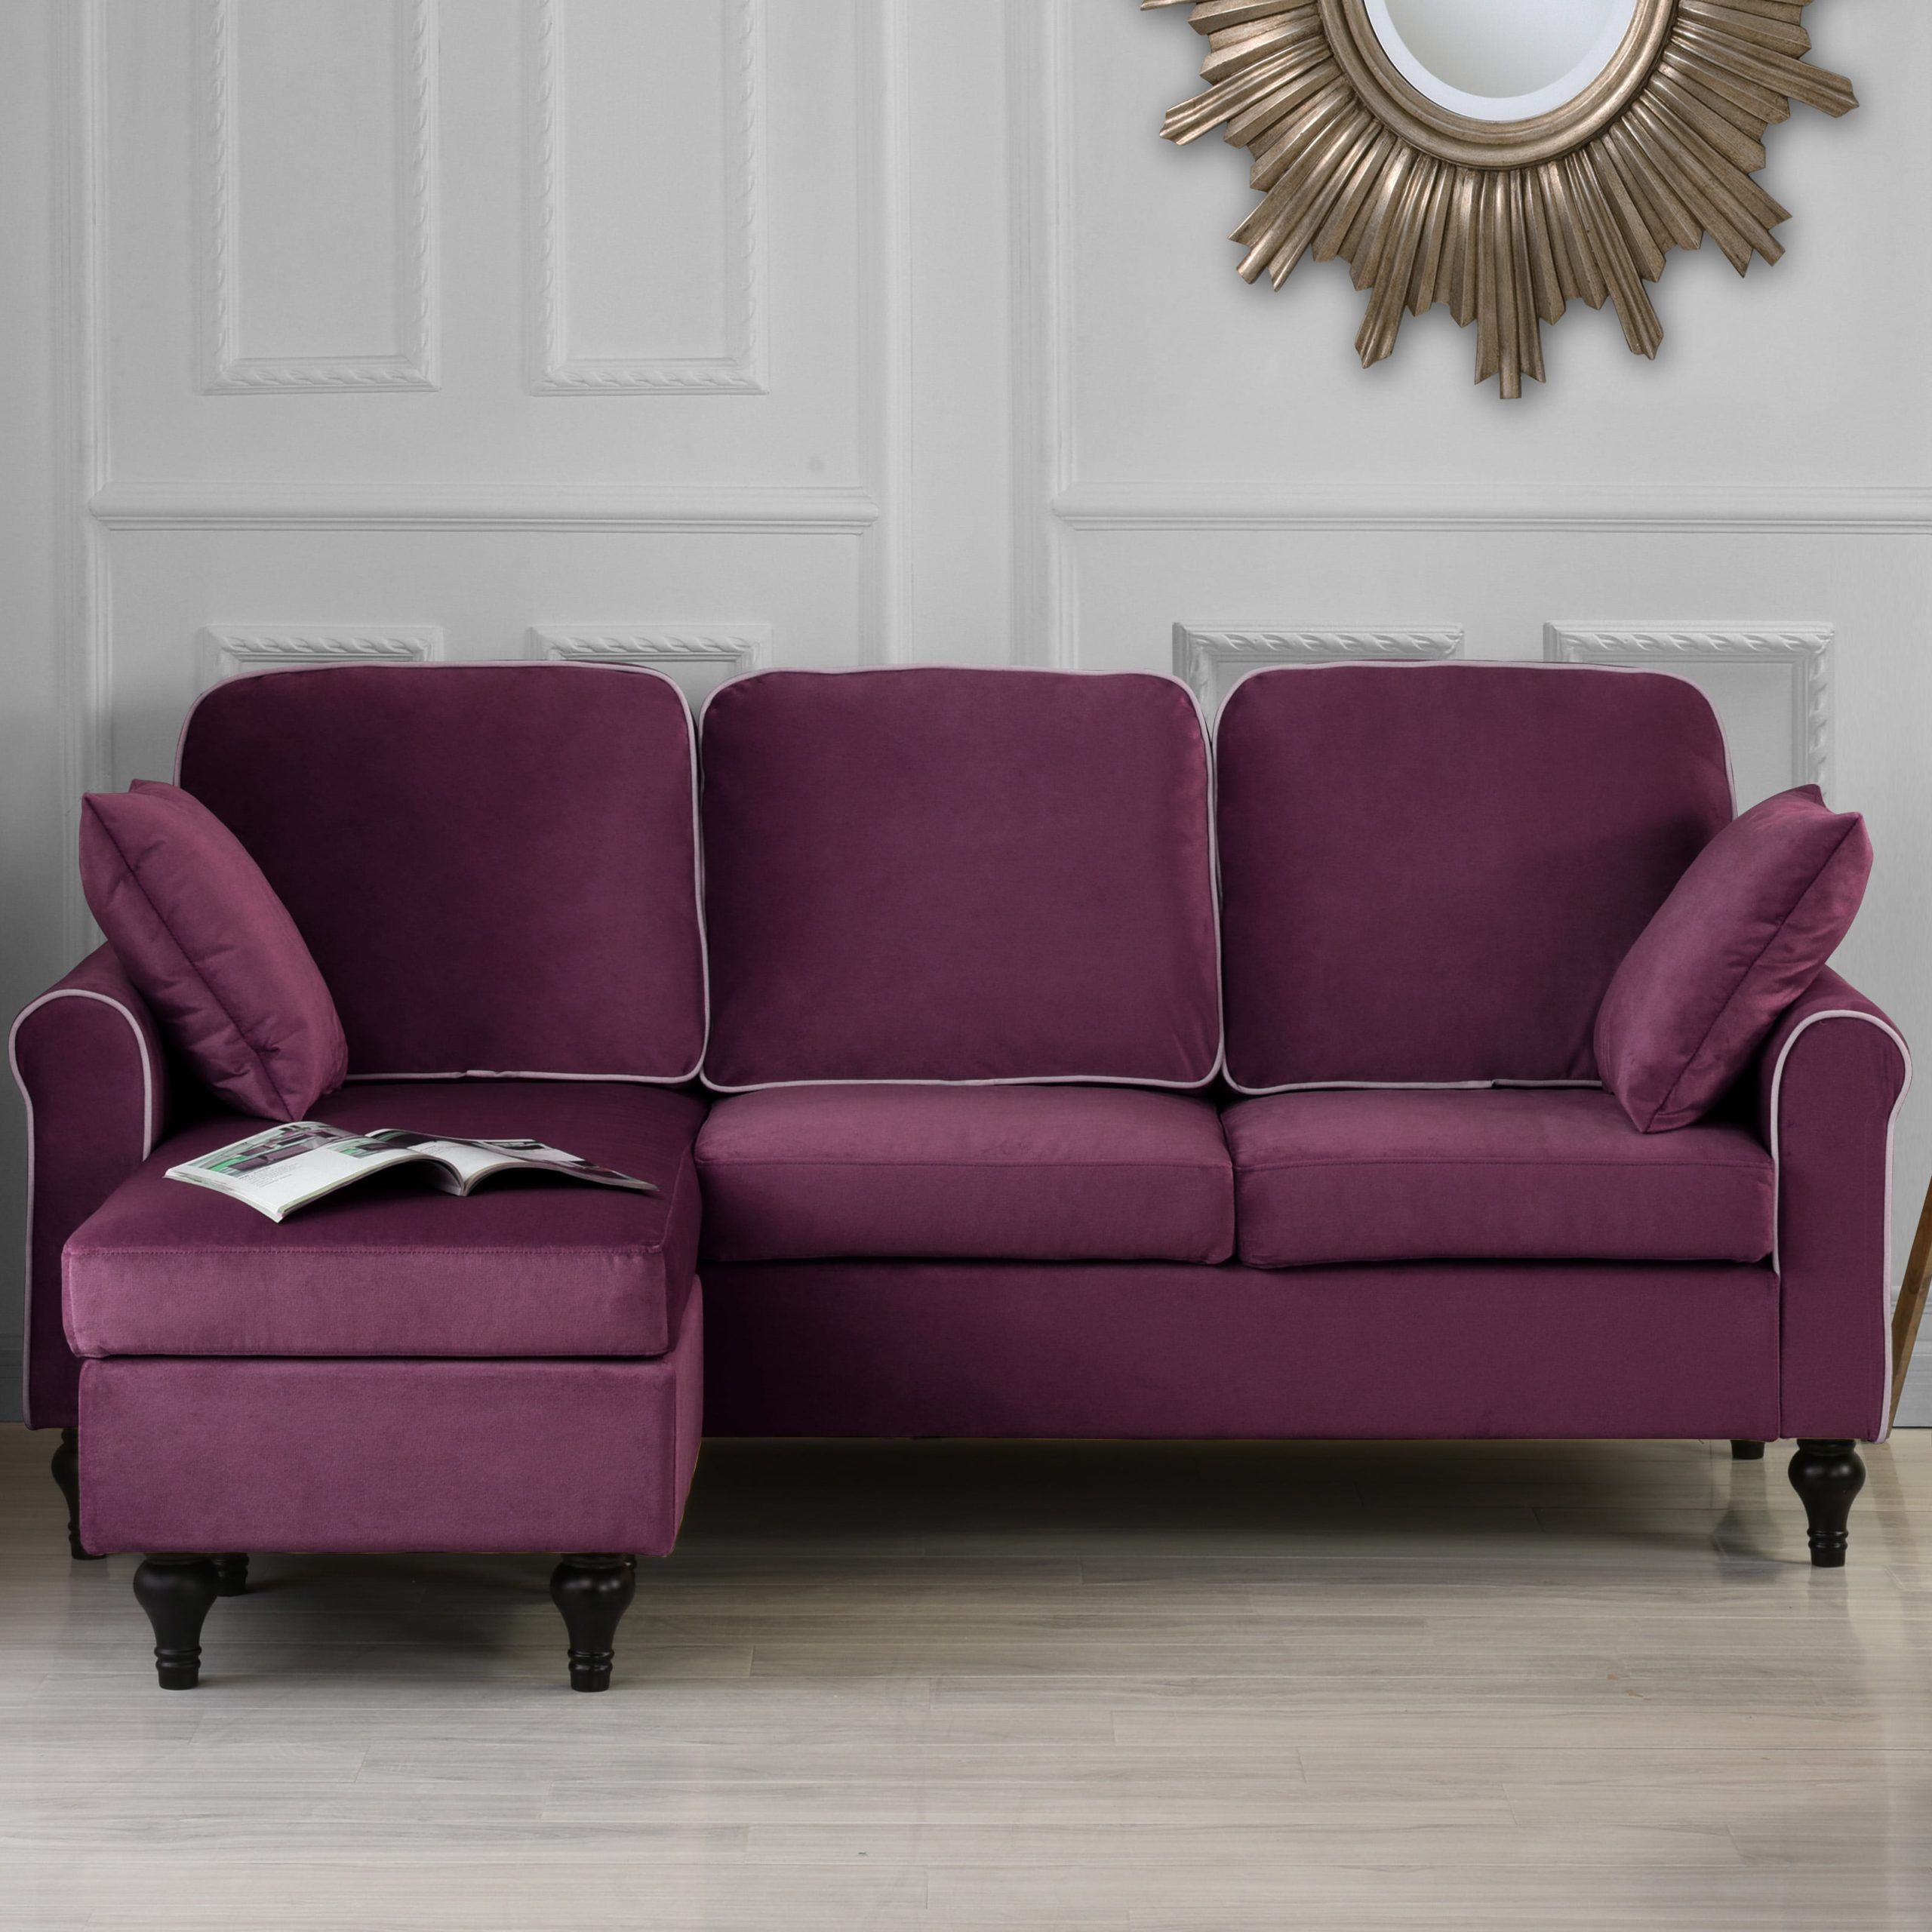 Classic And Traditional Small Space Velvet Sectional Sofa With With Regard To Sofas For Small Spaces (View 3 of 20)